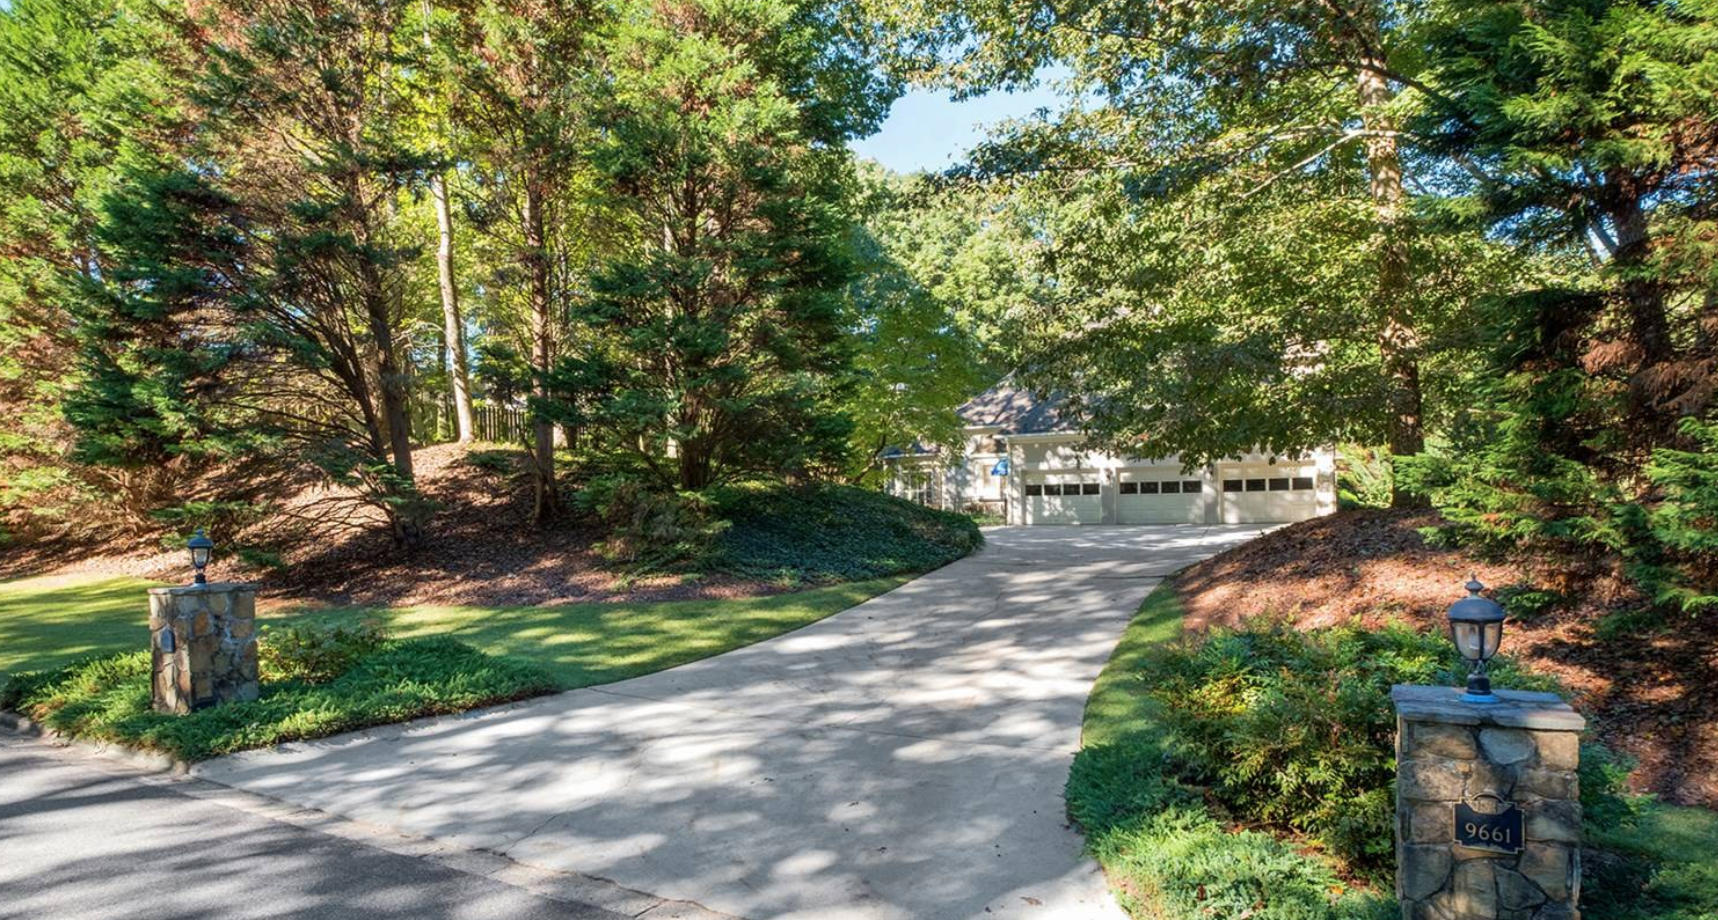 9661 Huntcliff Trace Sandy Springs Georgia 30350 Listed by Barb St. Amant 404-271-6733